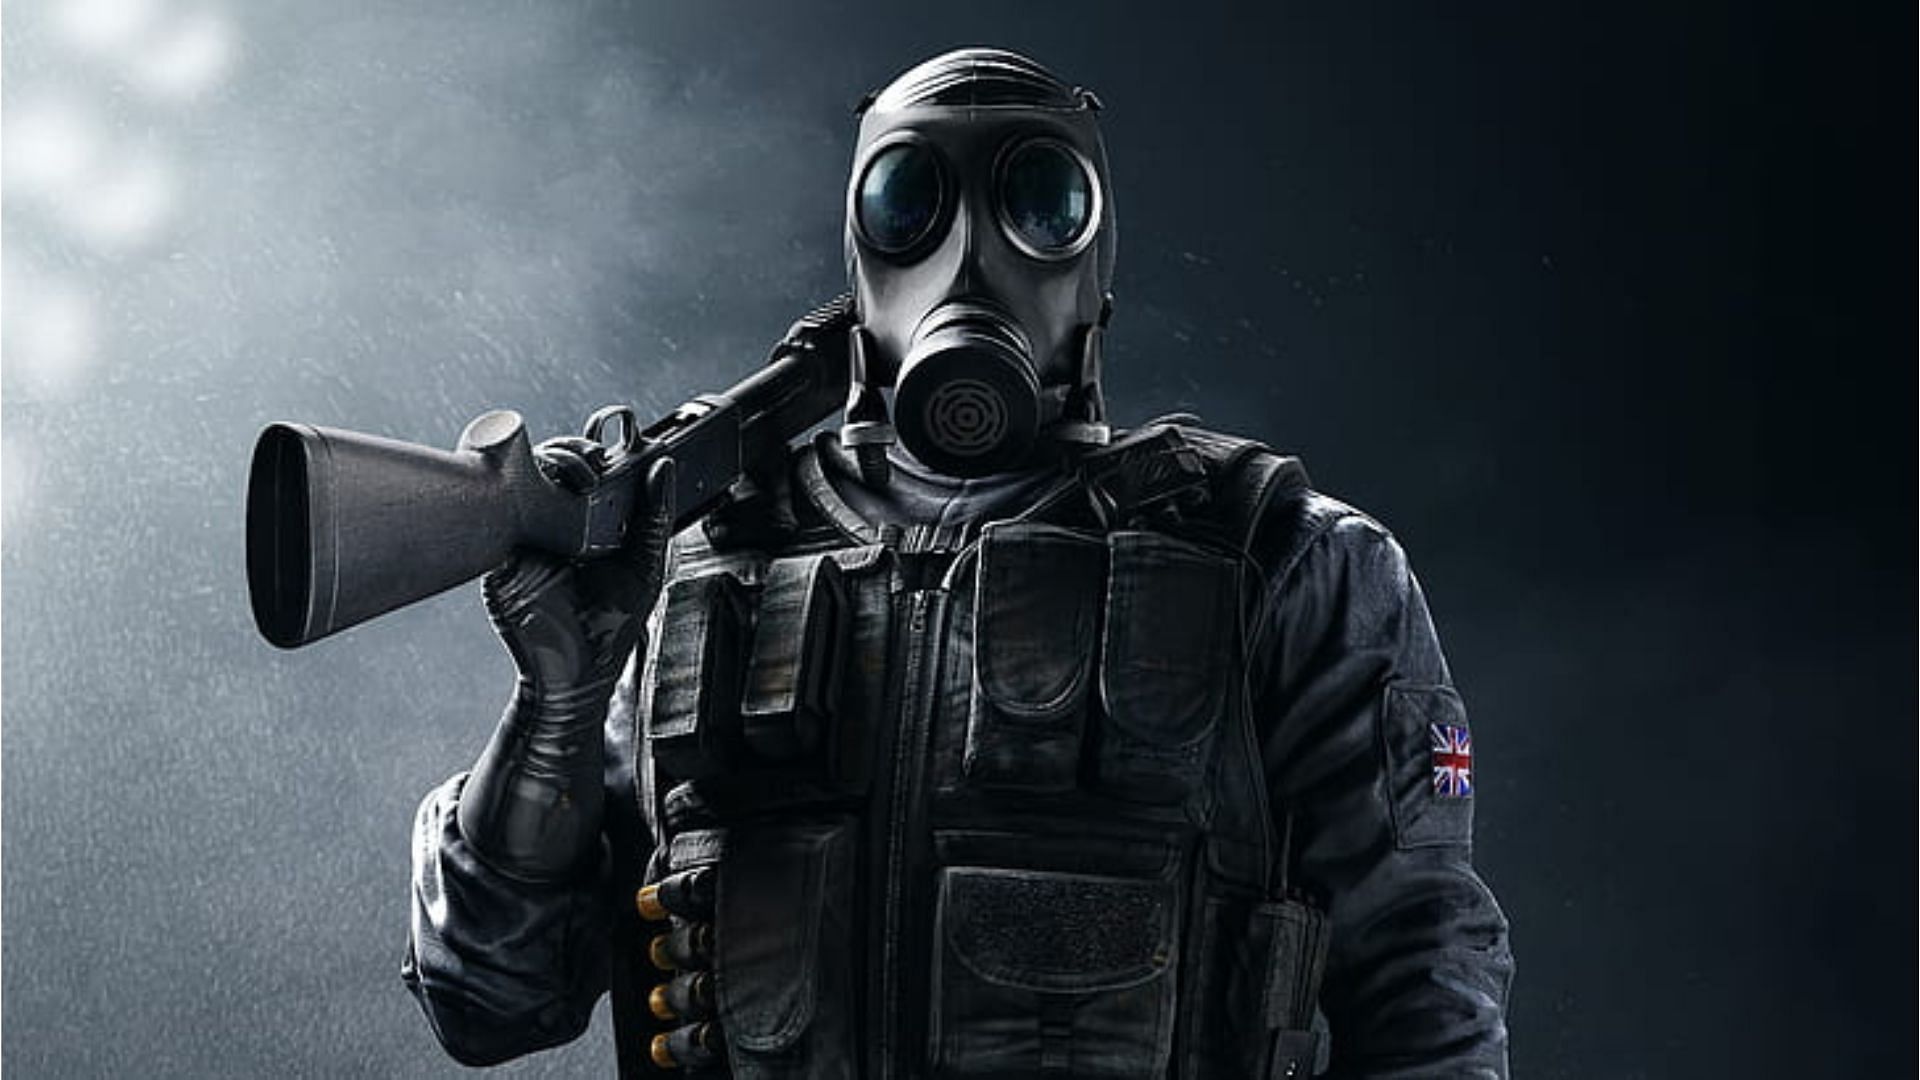 Introducing the best Smoke loadout in R6 Siege (Image via Ubisoft)